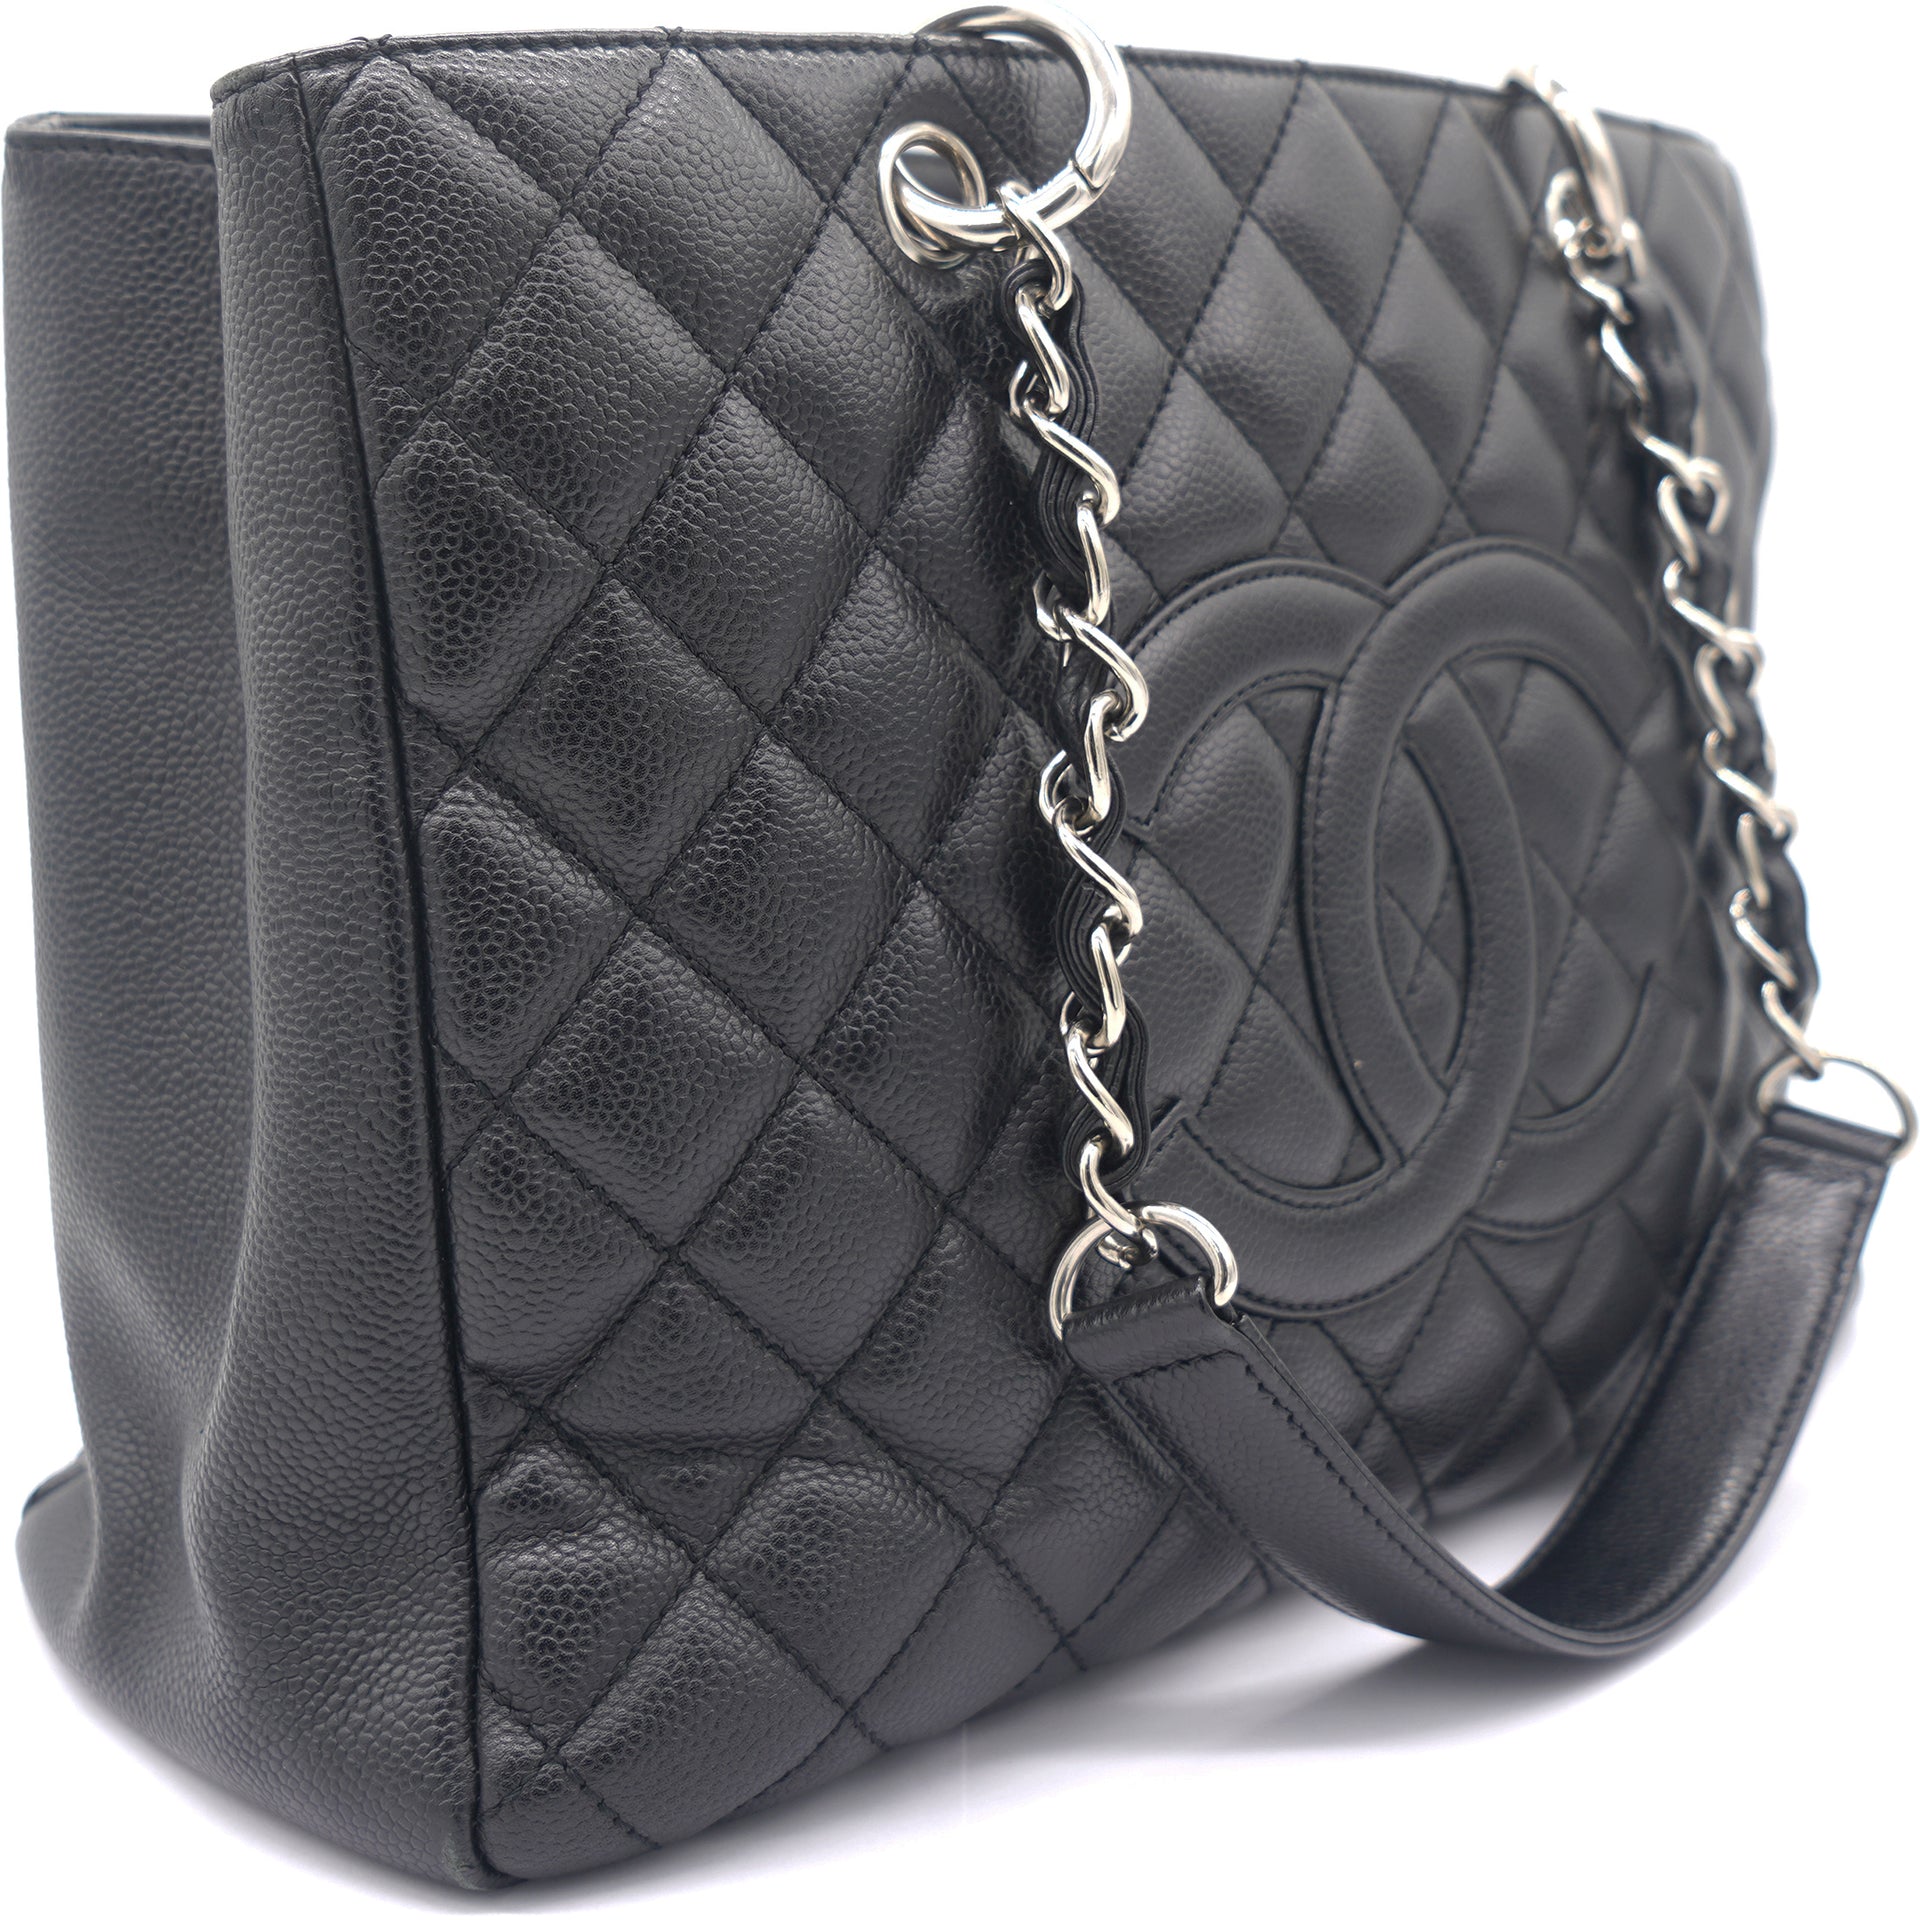 Chanel Black Quilted Caviar Leather Grand GST Shopper Tote Bag